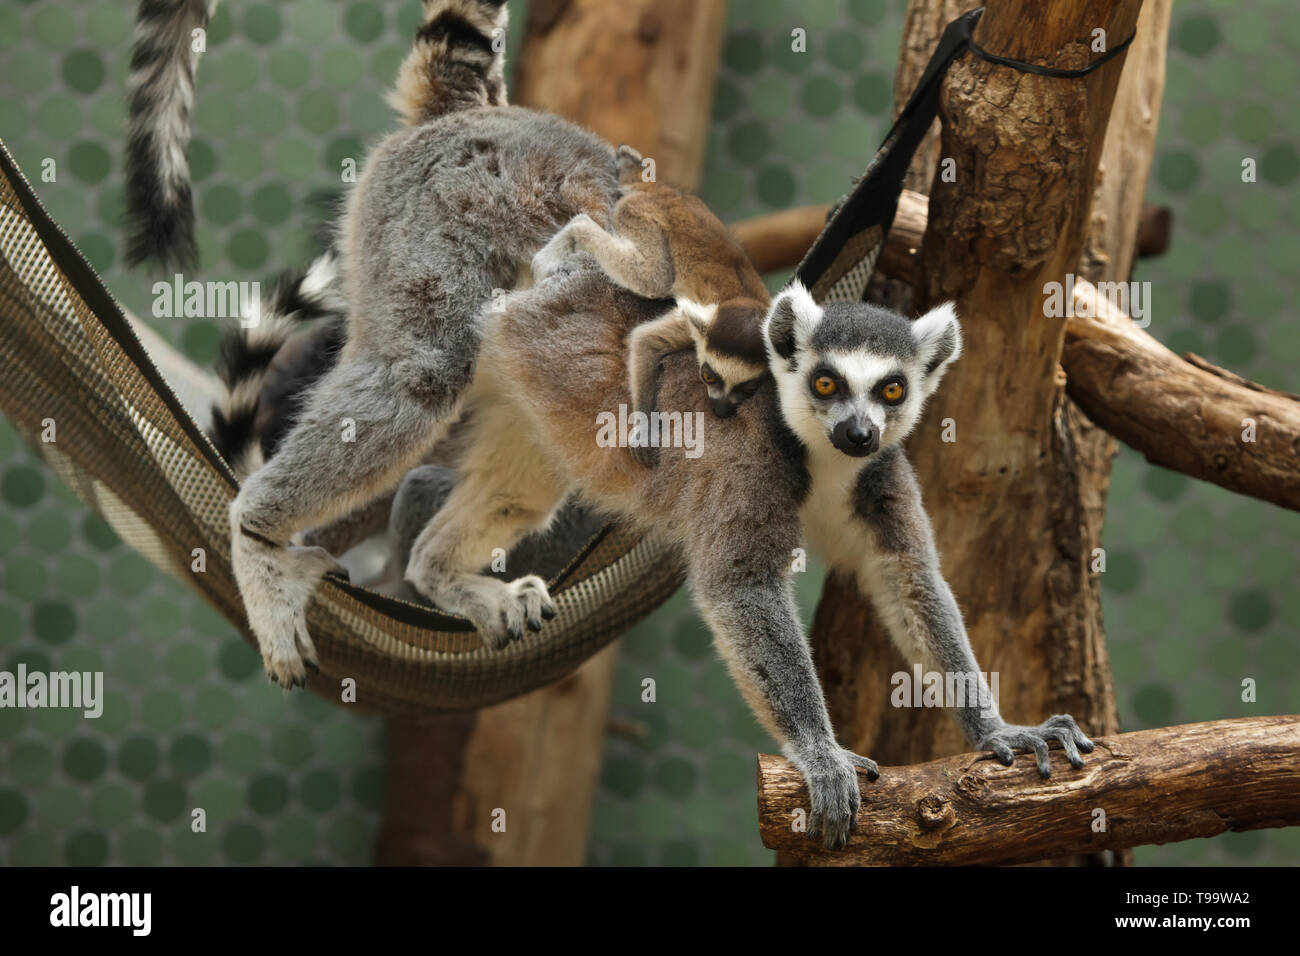 Ring-tailed lemur (Lemur catta) with its newborn baby in the back at Hellabrunn Zoo (Tierpark Hellabrunn) in Munich, Bavaria, Germany. Stock Photo